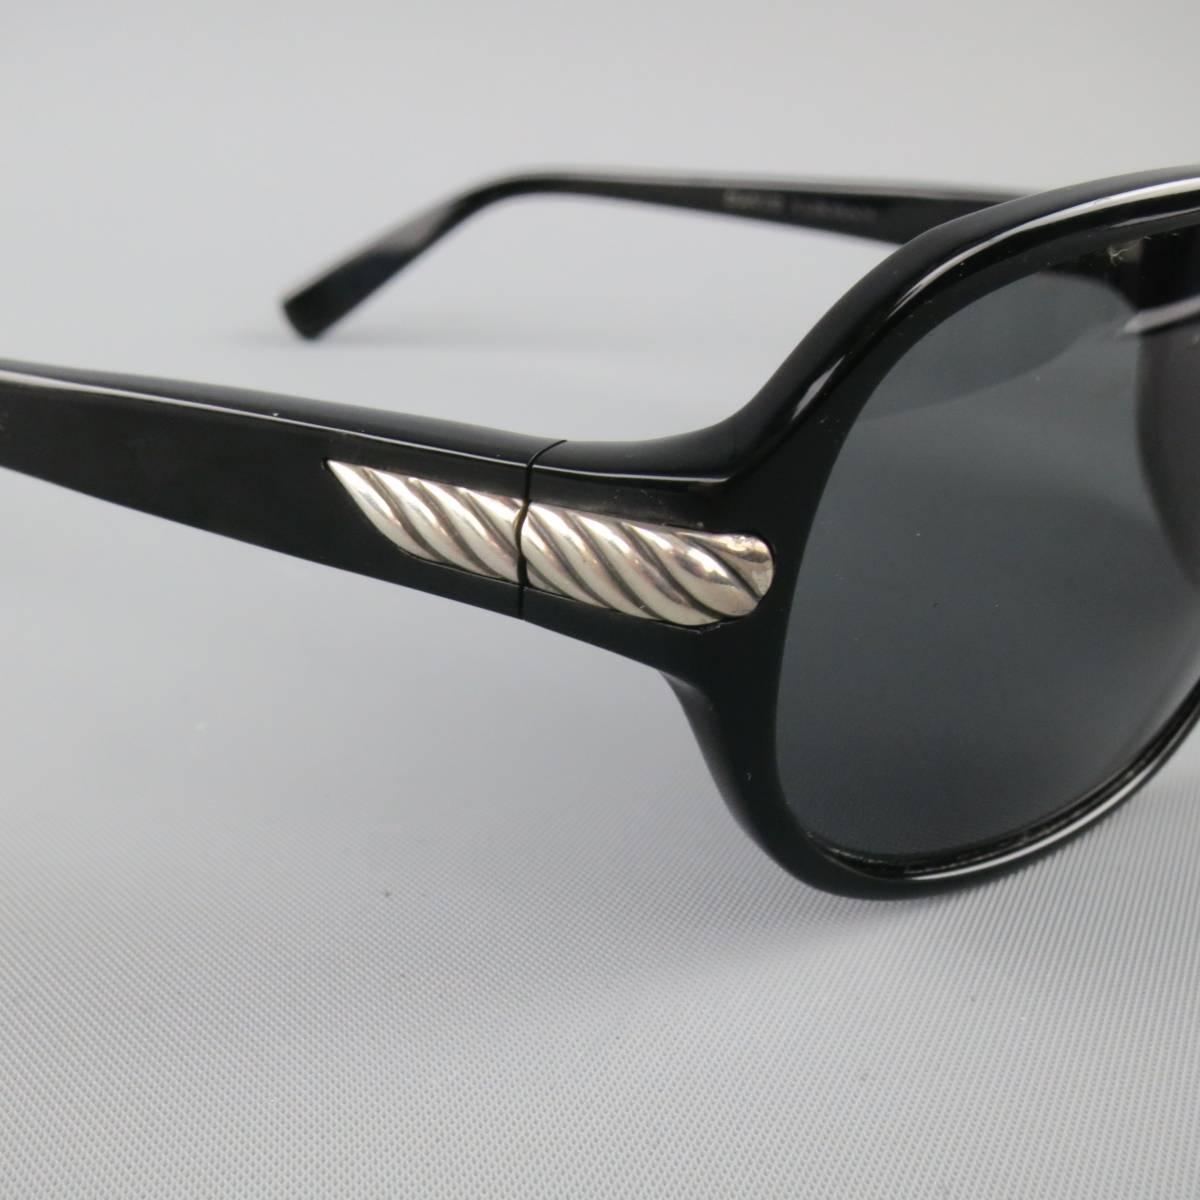 DAVID YURMAN aviator sunglasses come in black acetate and feature a sterling silver rope textured accent on the arms.
 
Good Pre-Owned Condition.
Marked: 605 01 SS 61-15-132
 
Width: 5.5 in.
Height: 2 in.
Arm: 5.5 in.


Web ID: 44605 